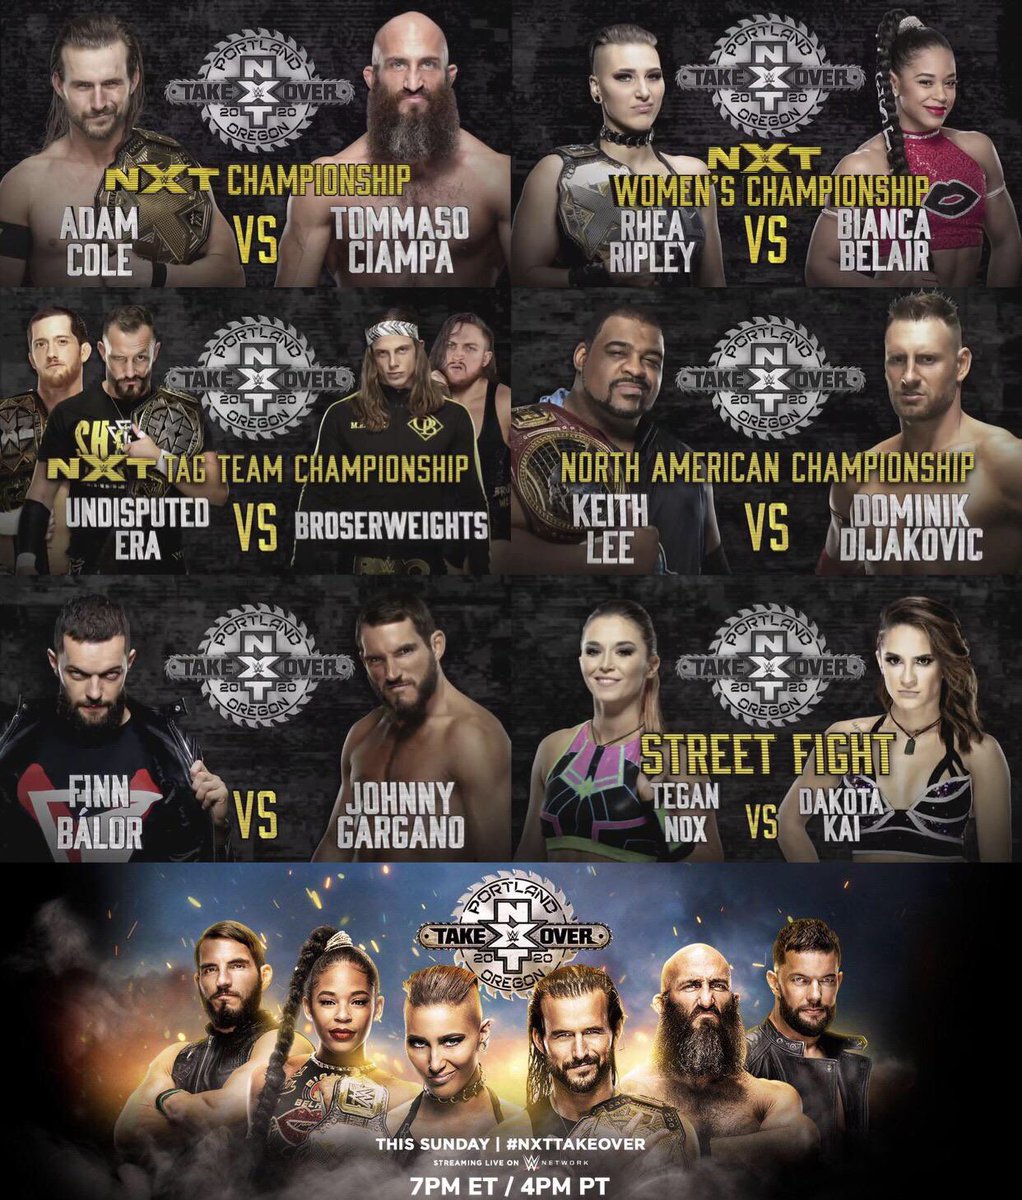 1.) NXT TAKEOVER: PORTLANDOVERALL GRADE: AYou look at one match from this card, and then look at the next. It keeps getting better & better. Banger after banger. EVERY match on this show delivered and wowed in it’s own way. Magic in the air. I can’t wait to get back to this.